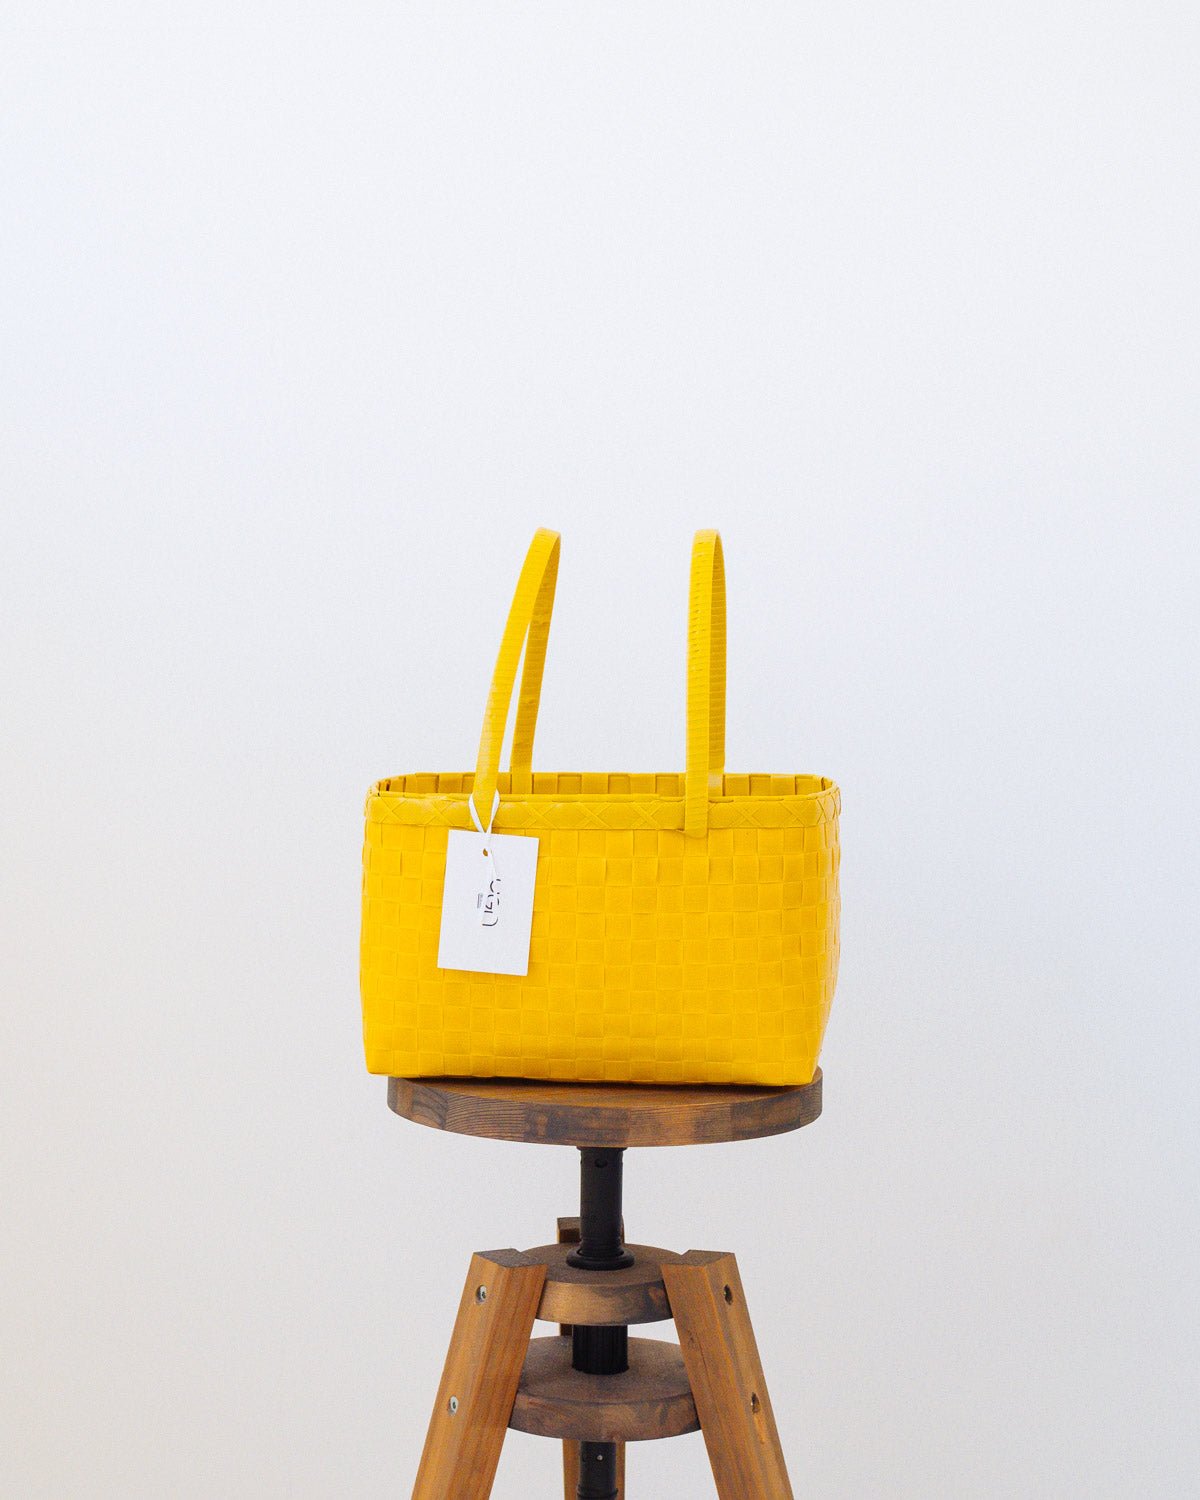 Zay Basket in Sunny Yellow | Woven Grocery Basket | Handmade in Myanmar - YGN Collective